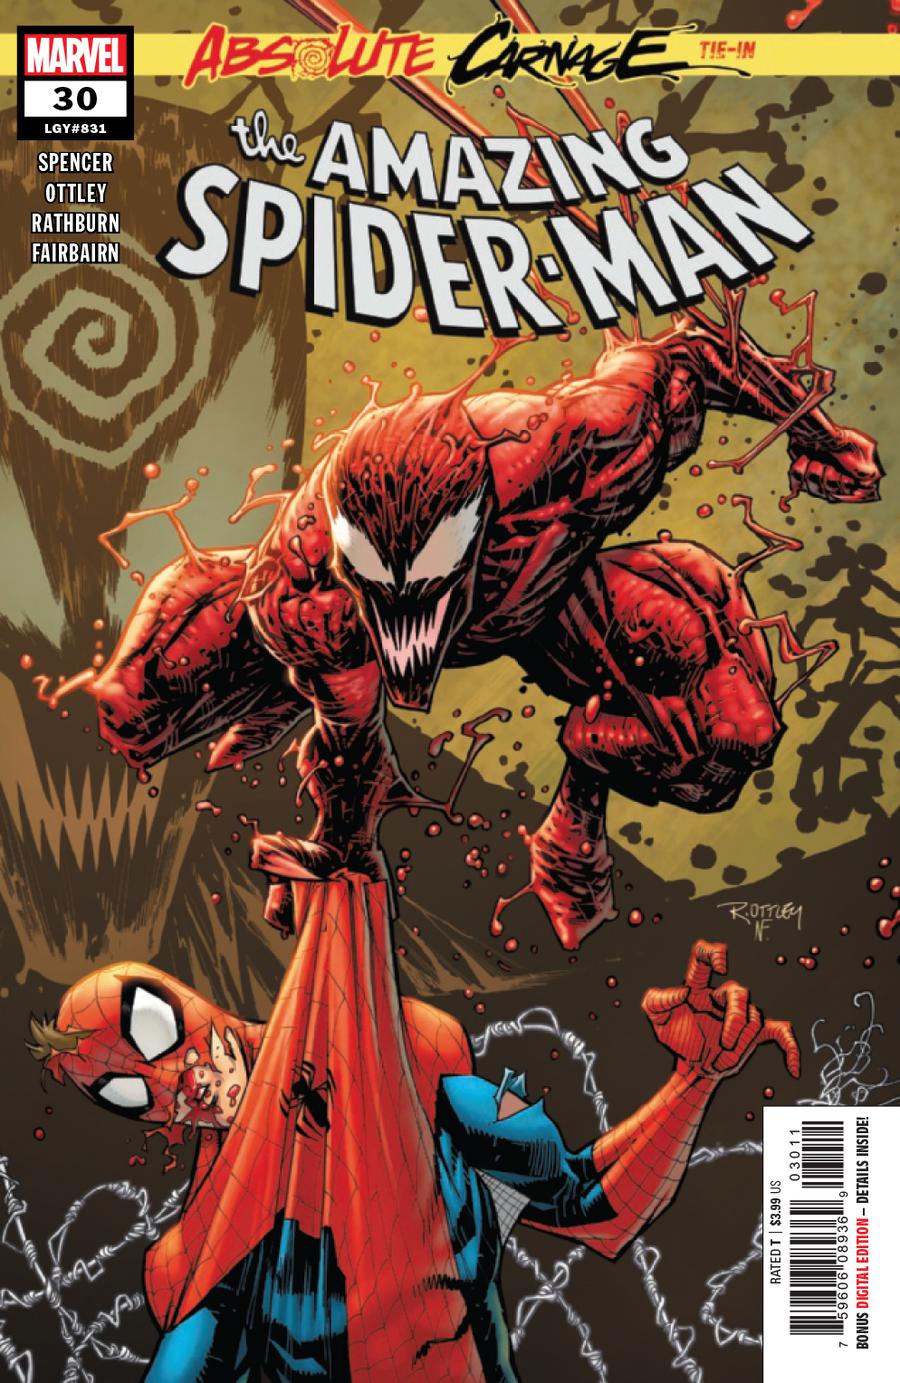 Amazing Spider-Man Vol 5 #30 Cover A 1st Ptg Regular Ryan Ottley Cover (Absolute Carnage Tie-In)